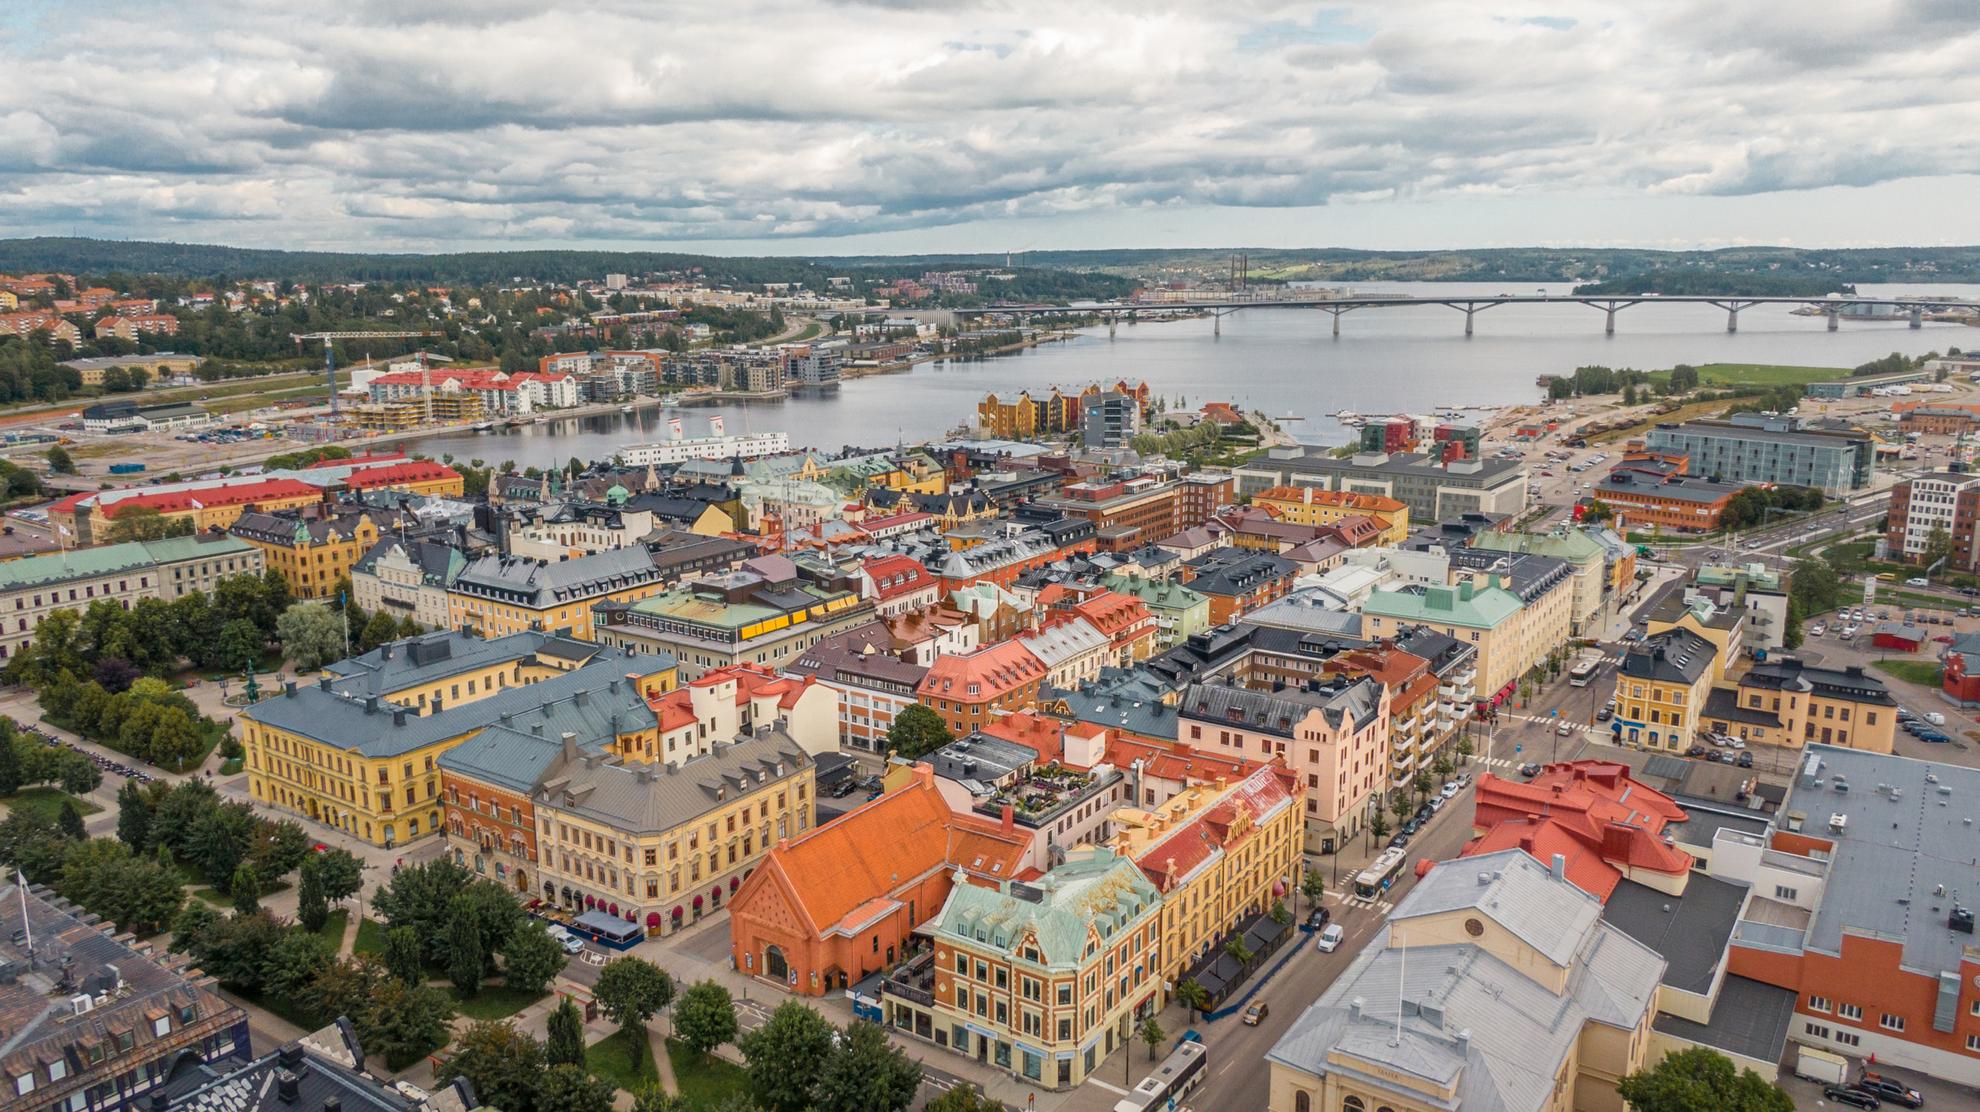 Aerial view of the city Sundsvall. A long bridge can be seen inte background.